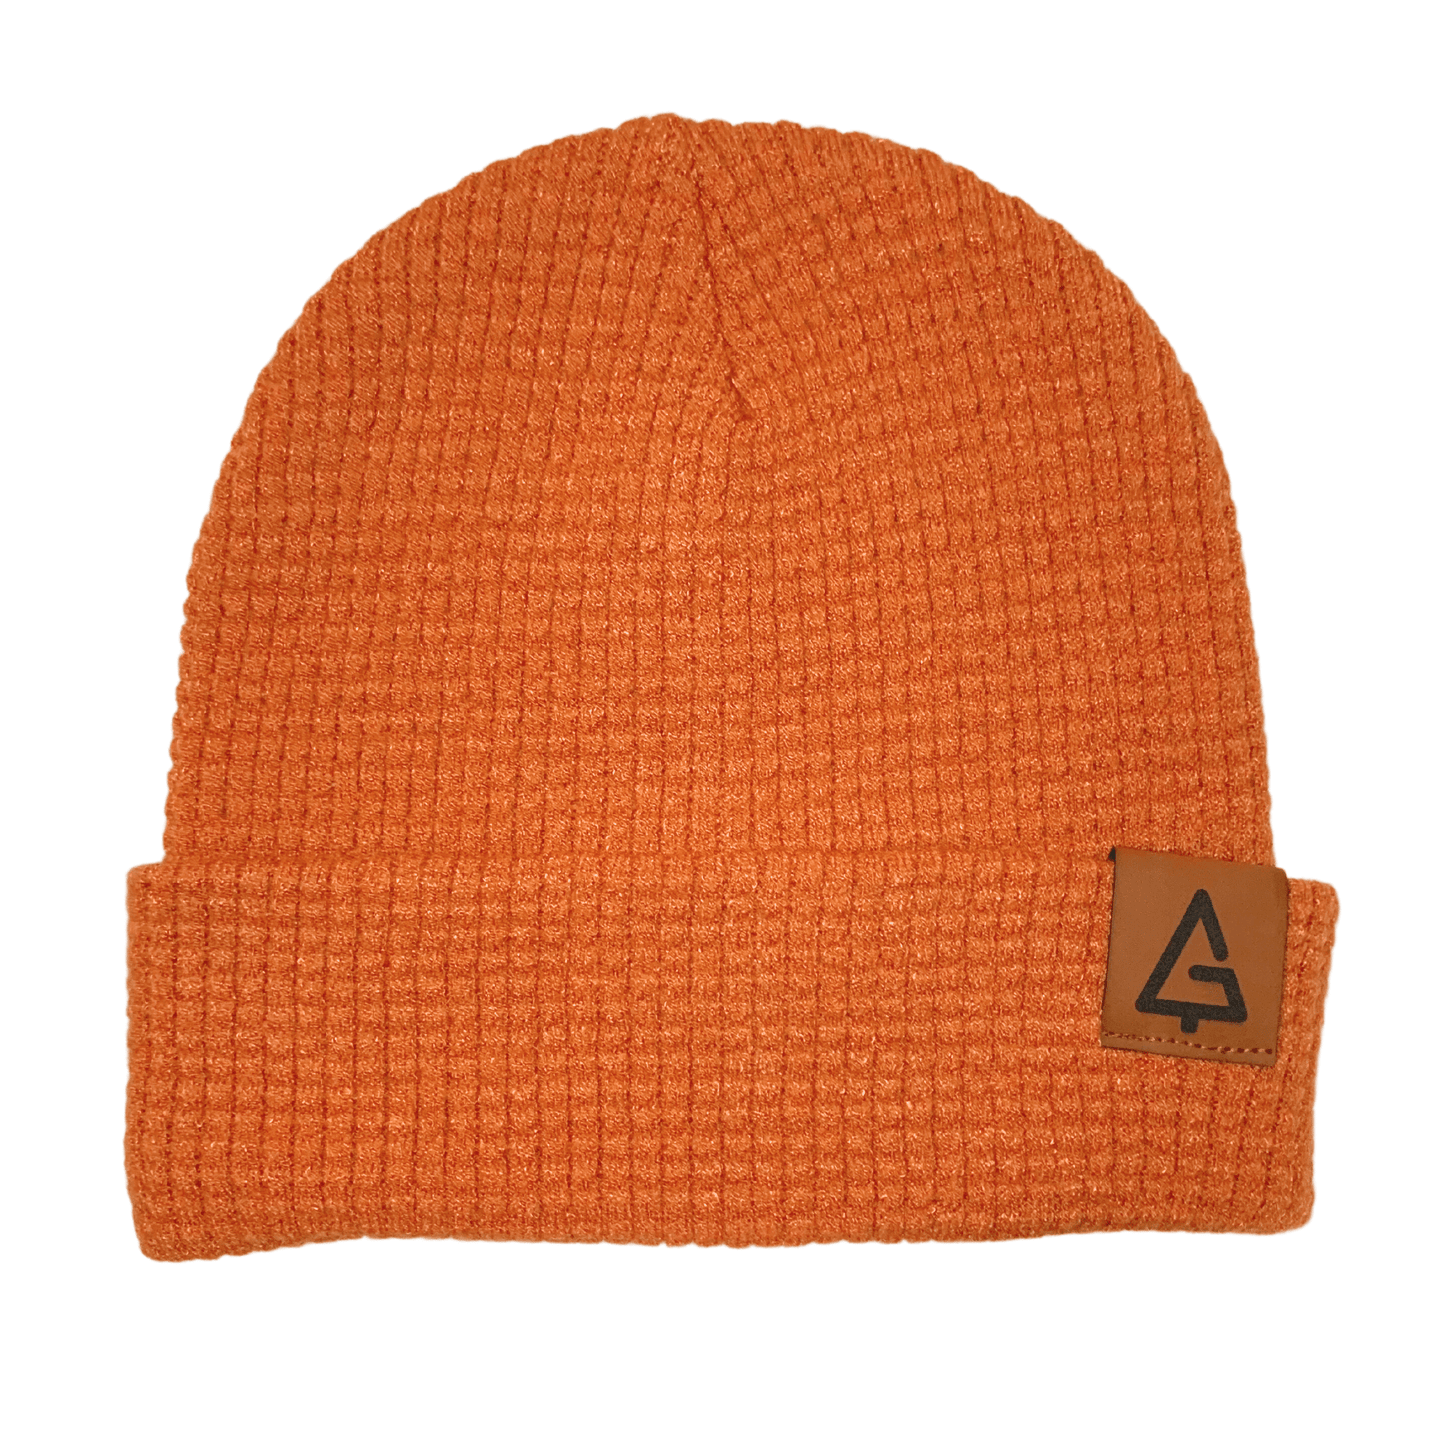 "G" Tree Waffle Toque - Go Way Out